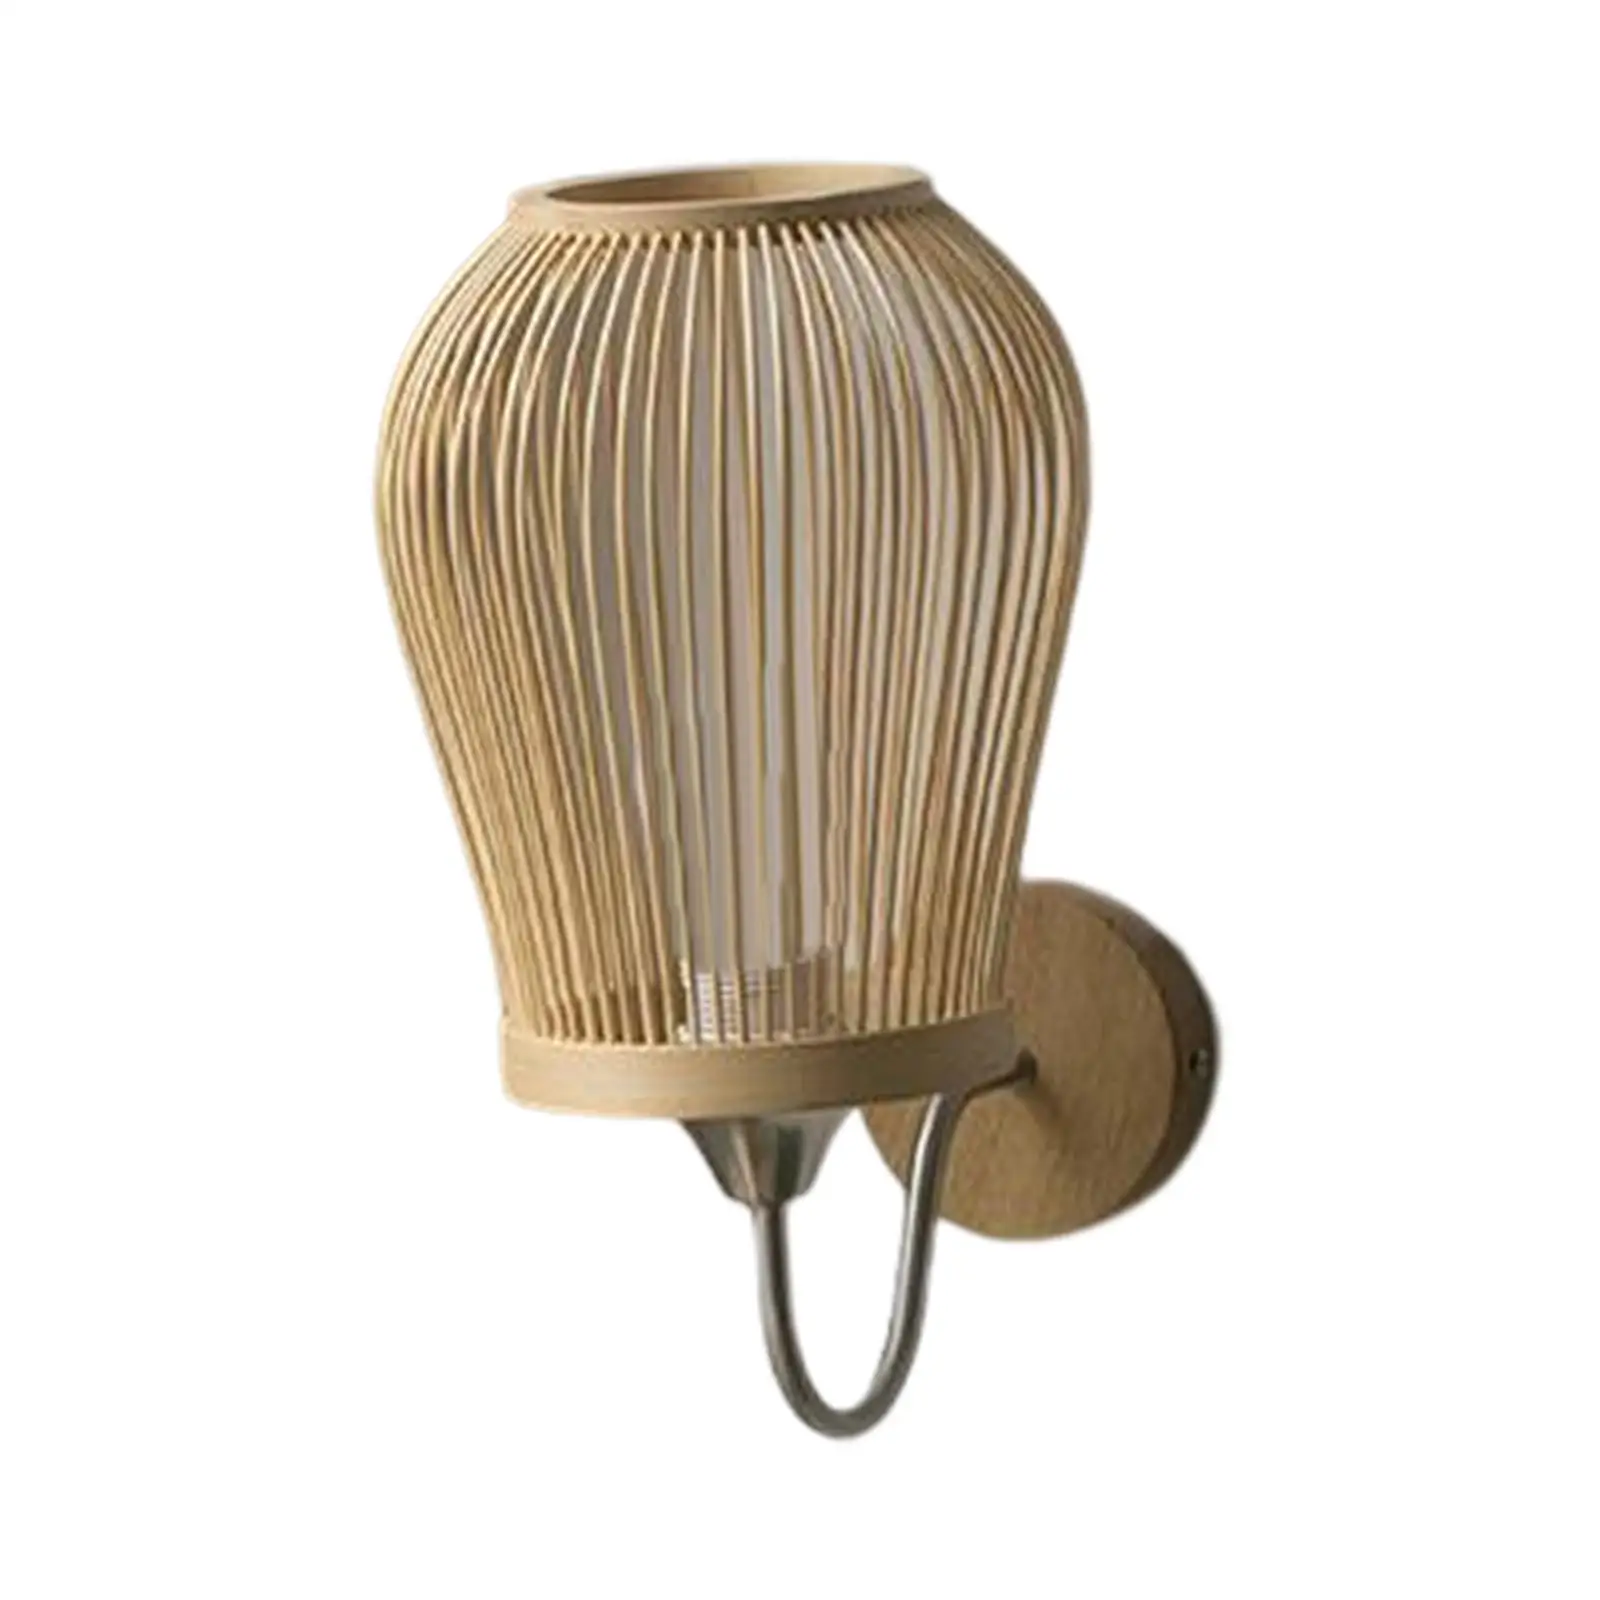 Bamboo Wall Sconce Lamp Light Lighting Retro Style Farmhouse E27 Base Decorative for Cafe Bedside Indoor Kitchen Decoration